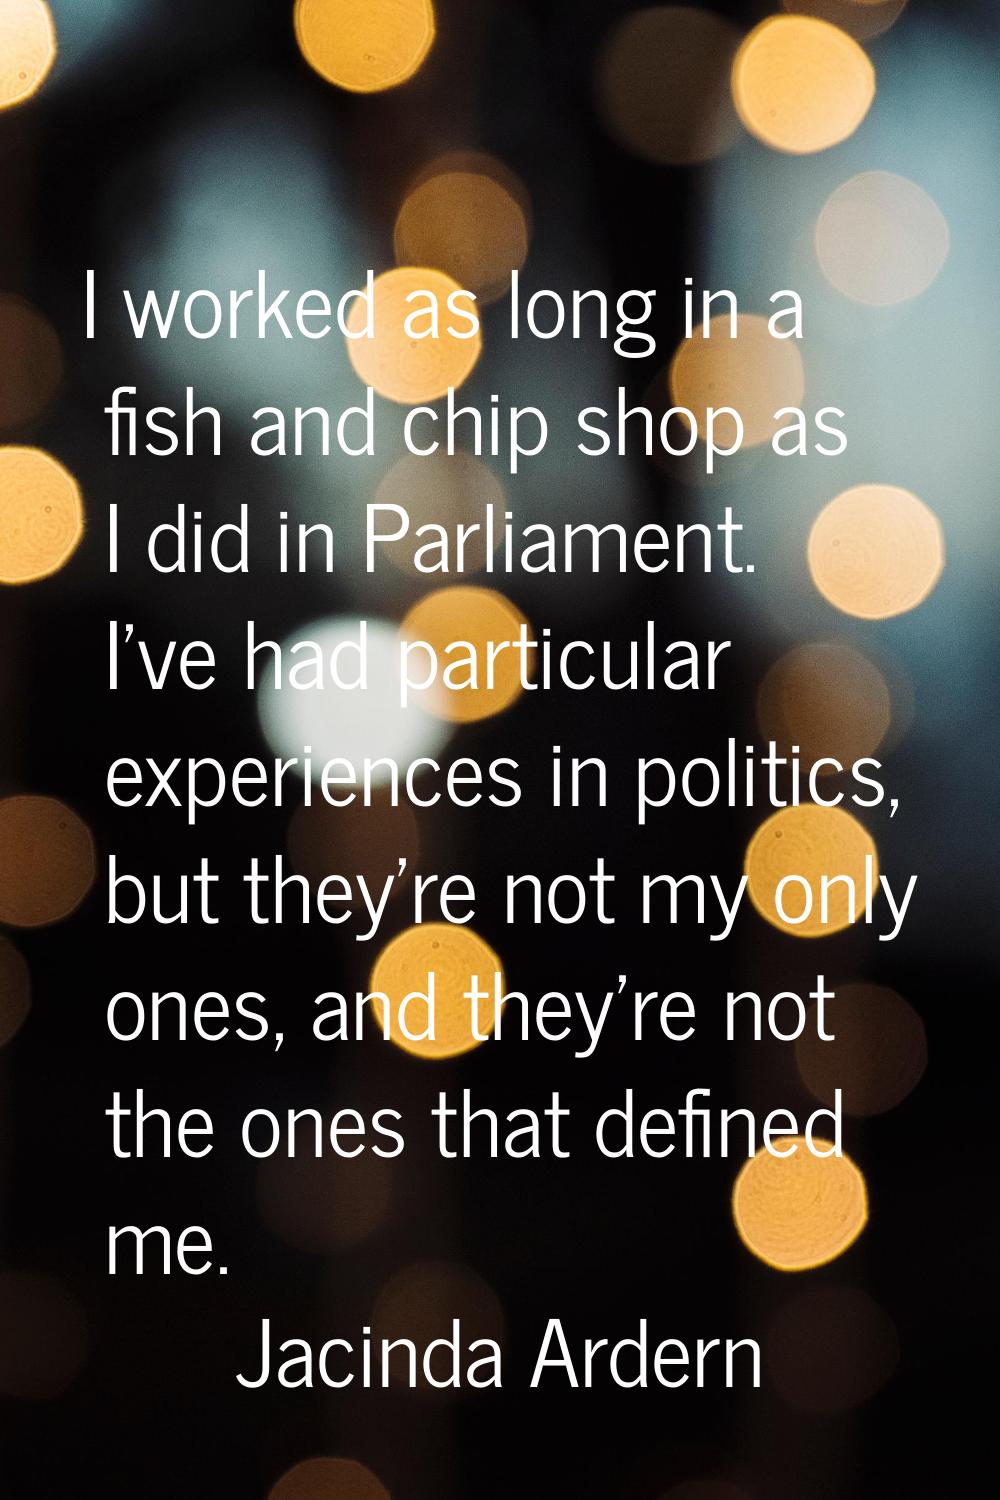 I worked as long in a fish and chip shop as I did in Parliament. I've had particular experiences in